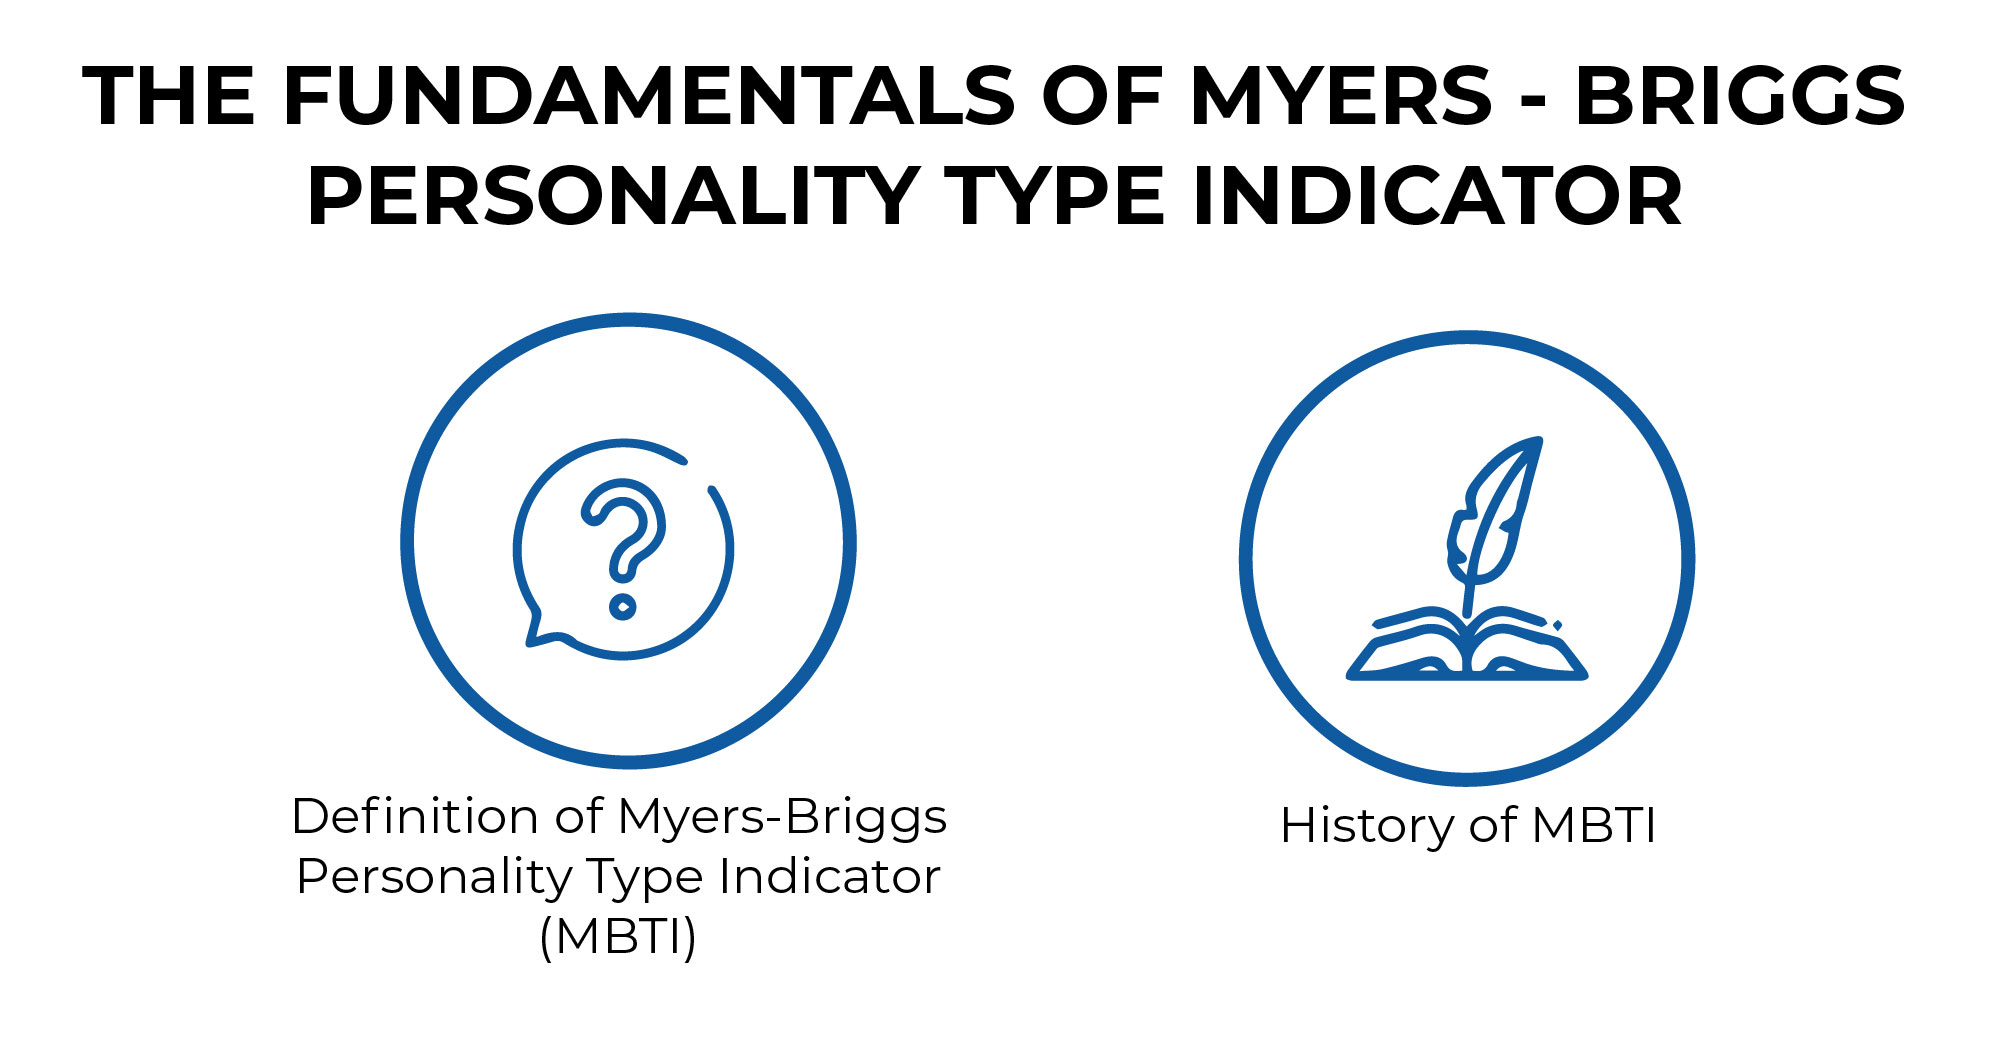 THE FUNDAMENTALS OF MYERS - BRIGGS PERSONALITY TYPE INDICATOR